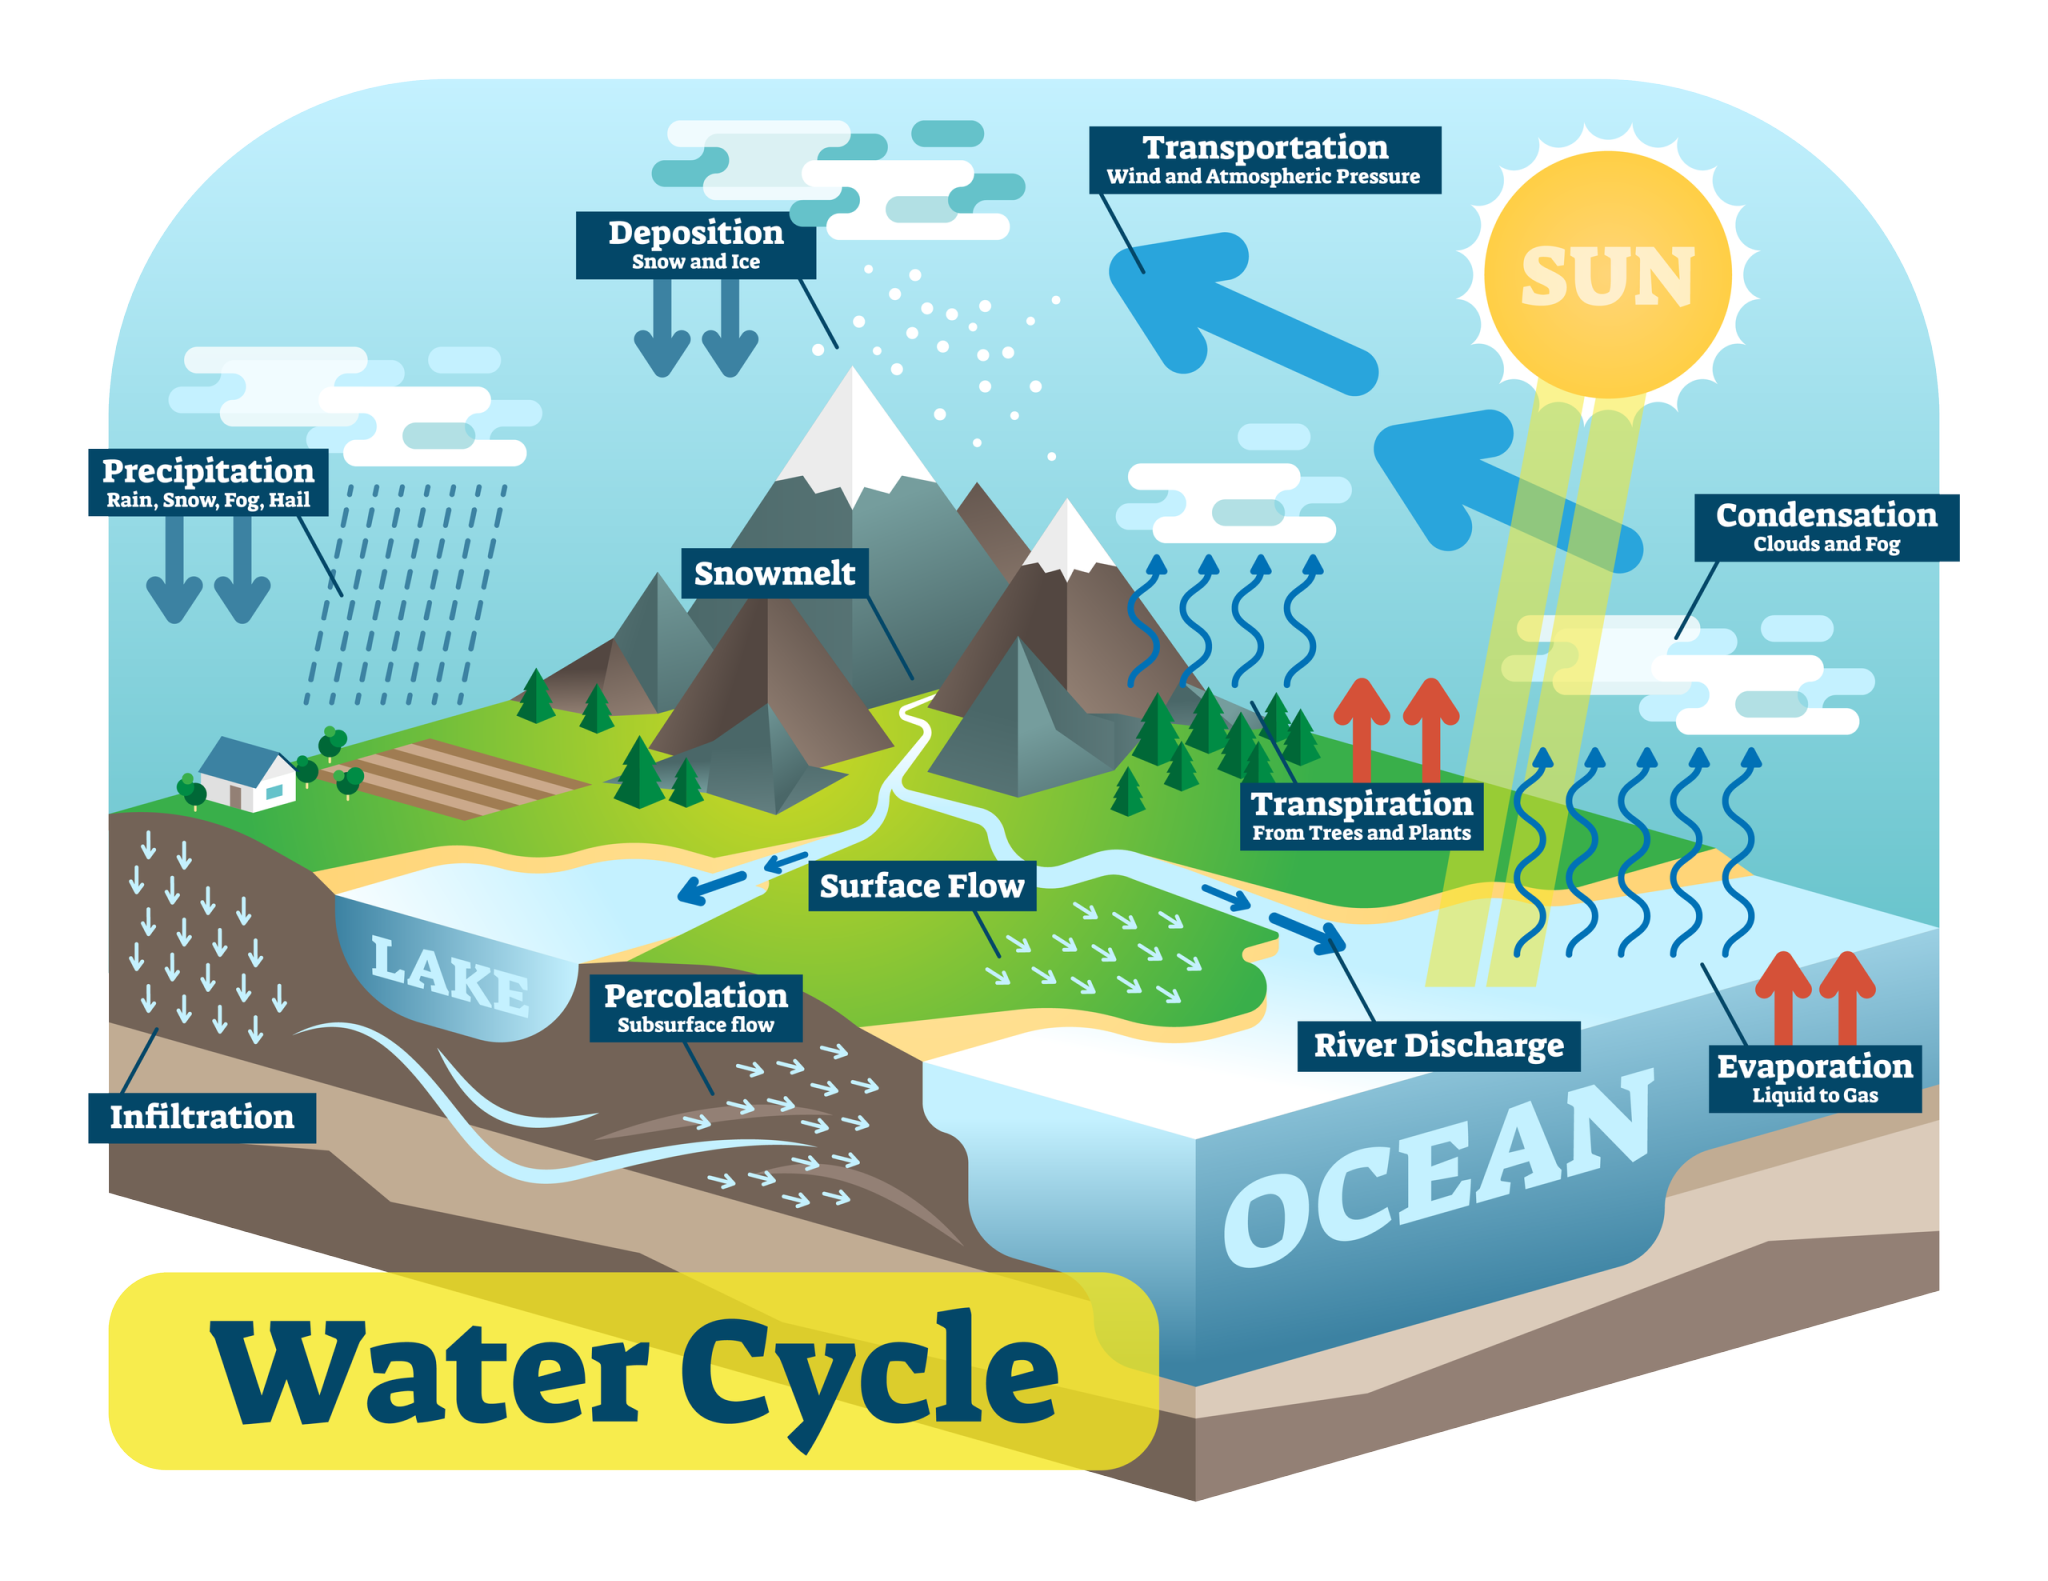 How Is Climate Change Impacting The Water Cycle?